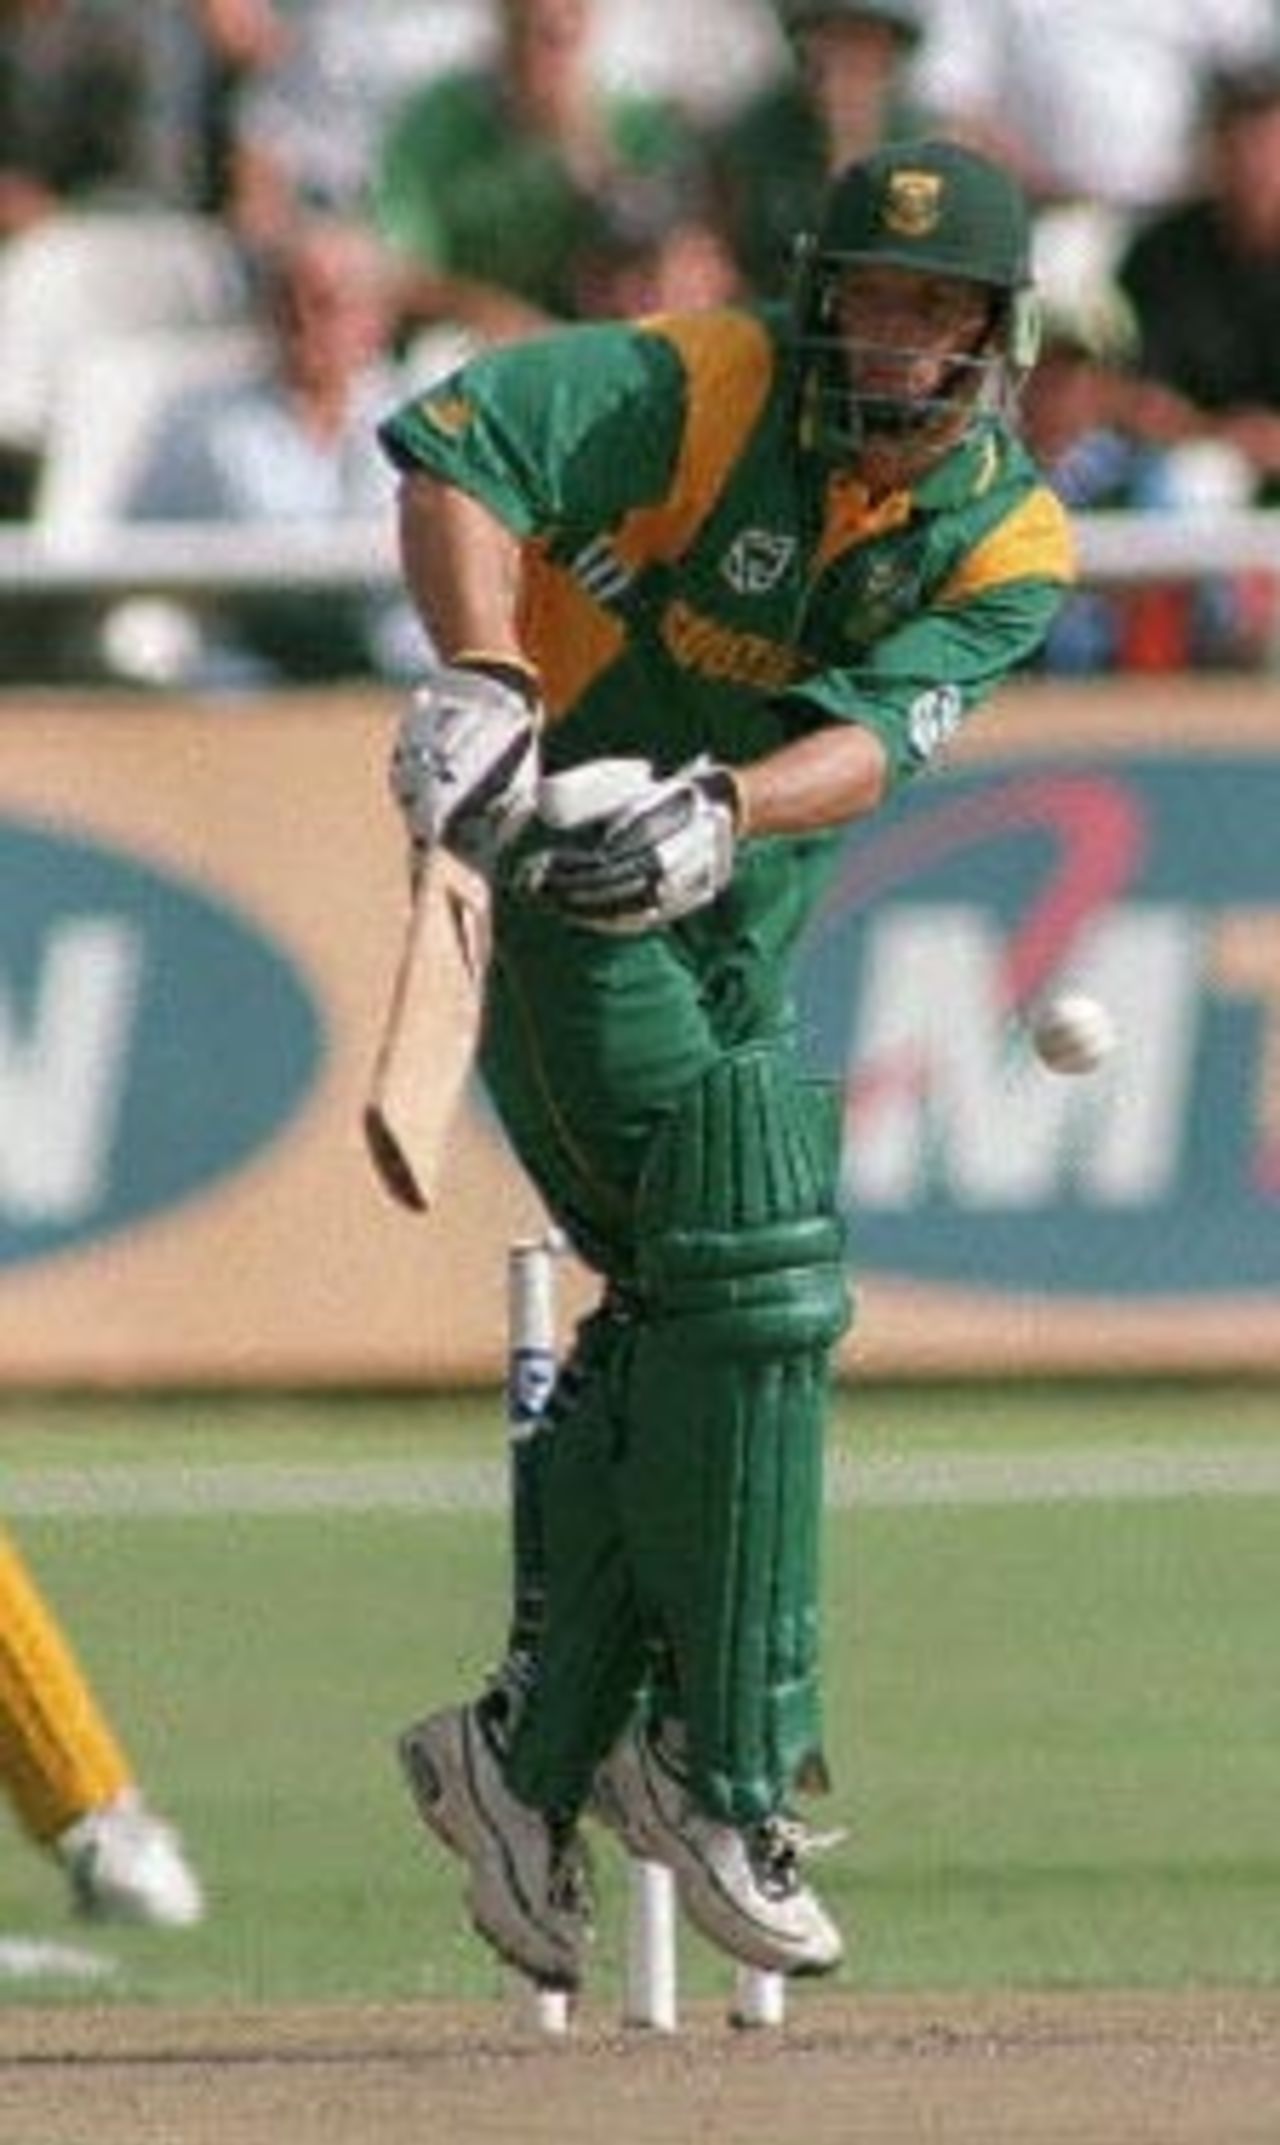 South African batsman Gary Kirsten is seen in action against the visiting Australians during the limited overs international played at Newlands in Cape Town 14 April 2000. The match is the second of three one day internationals being played in South Africa.